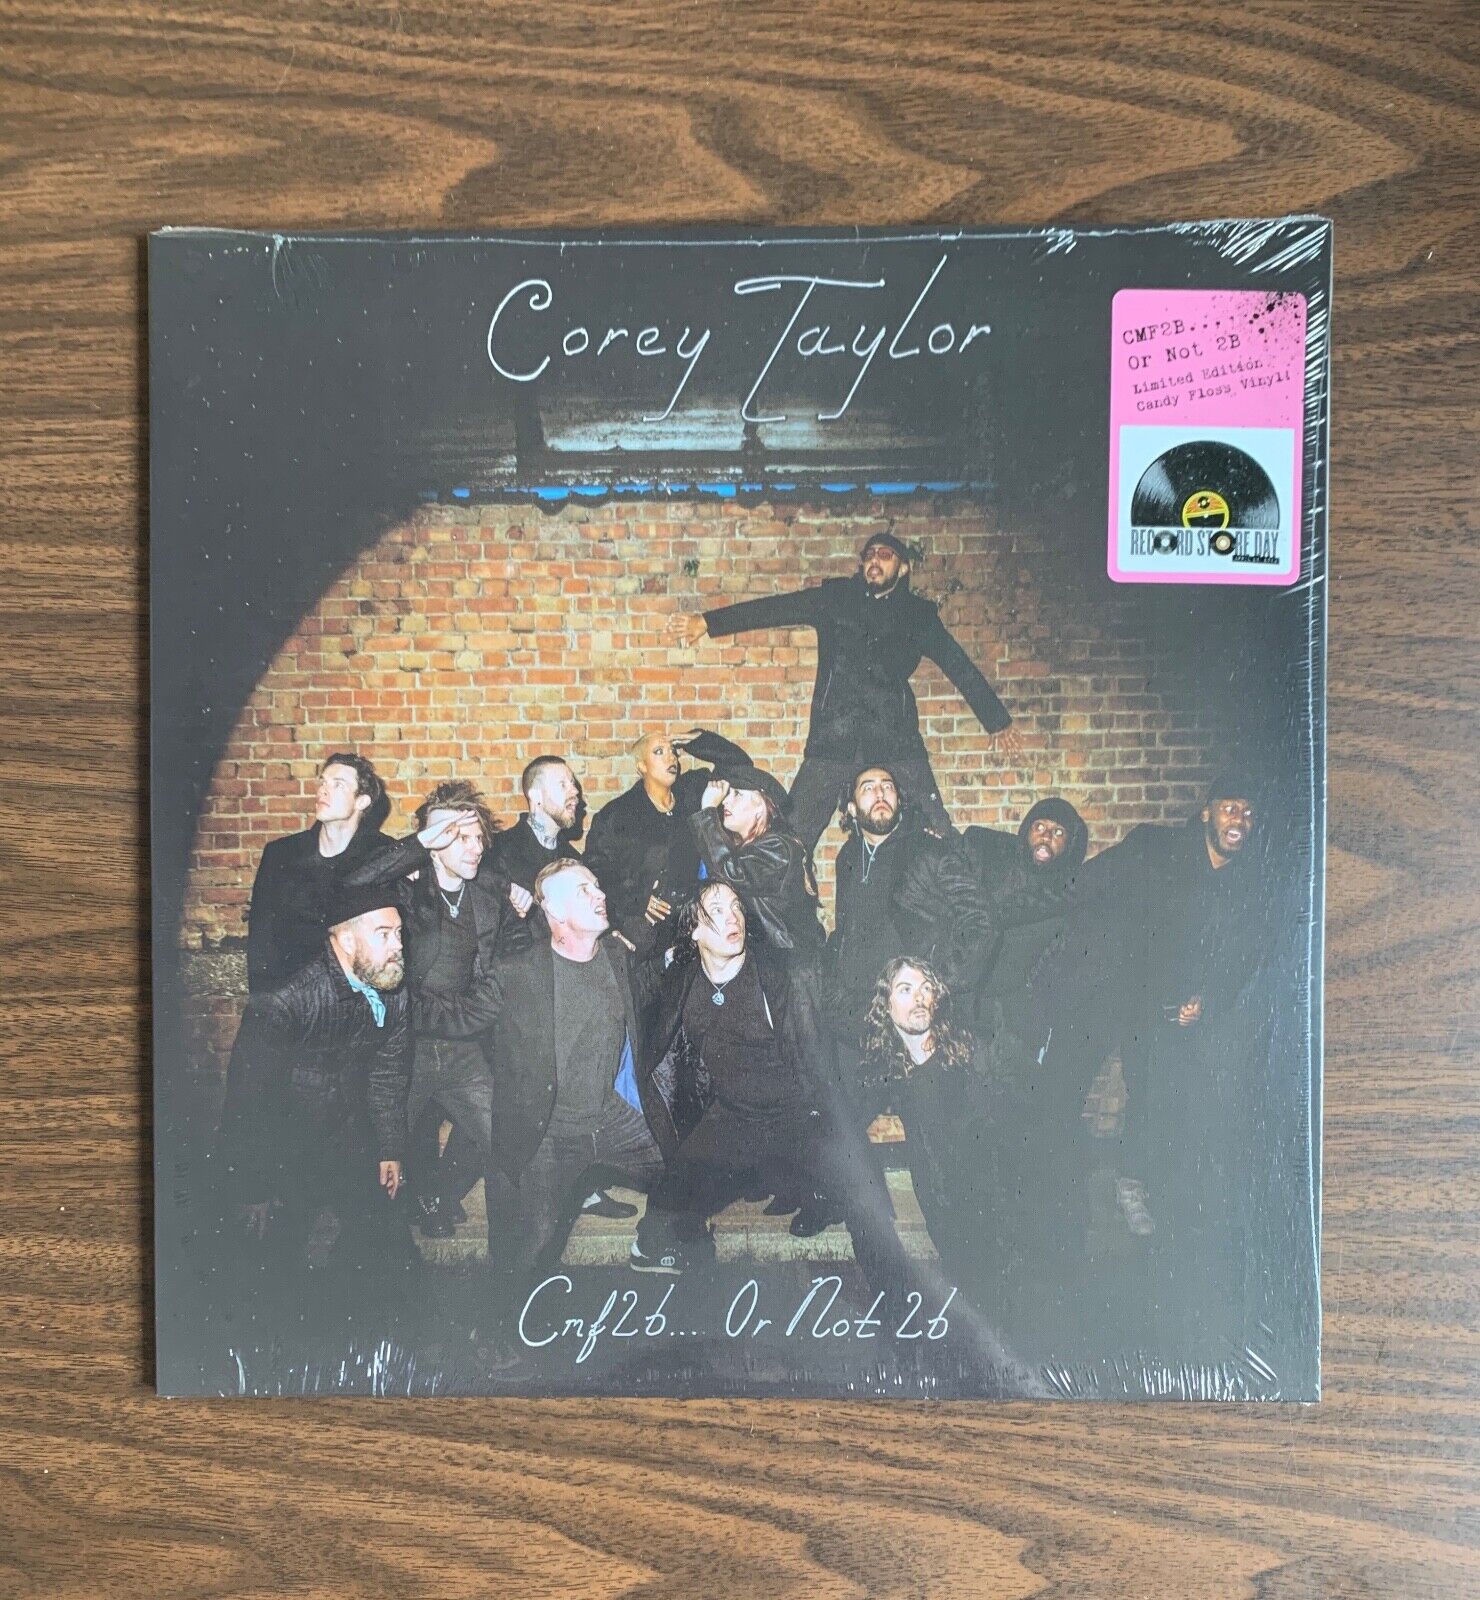 COREY TAYLOR CMF2B OR NOT 2B CANDY FLOSS COLOR VINYL NEW SEALED RSD 2024